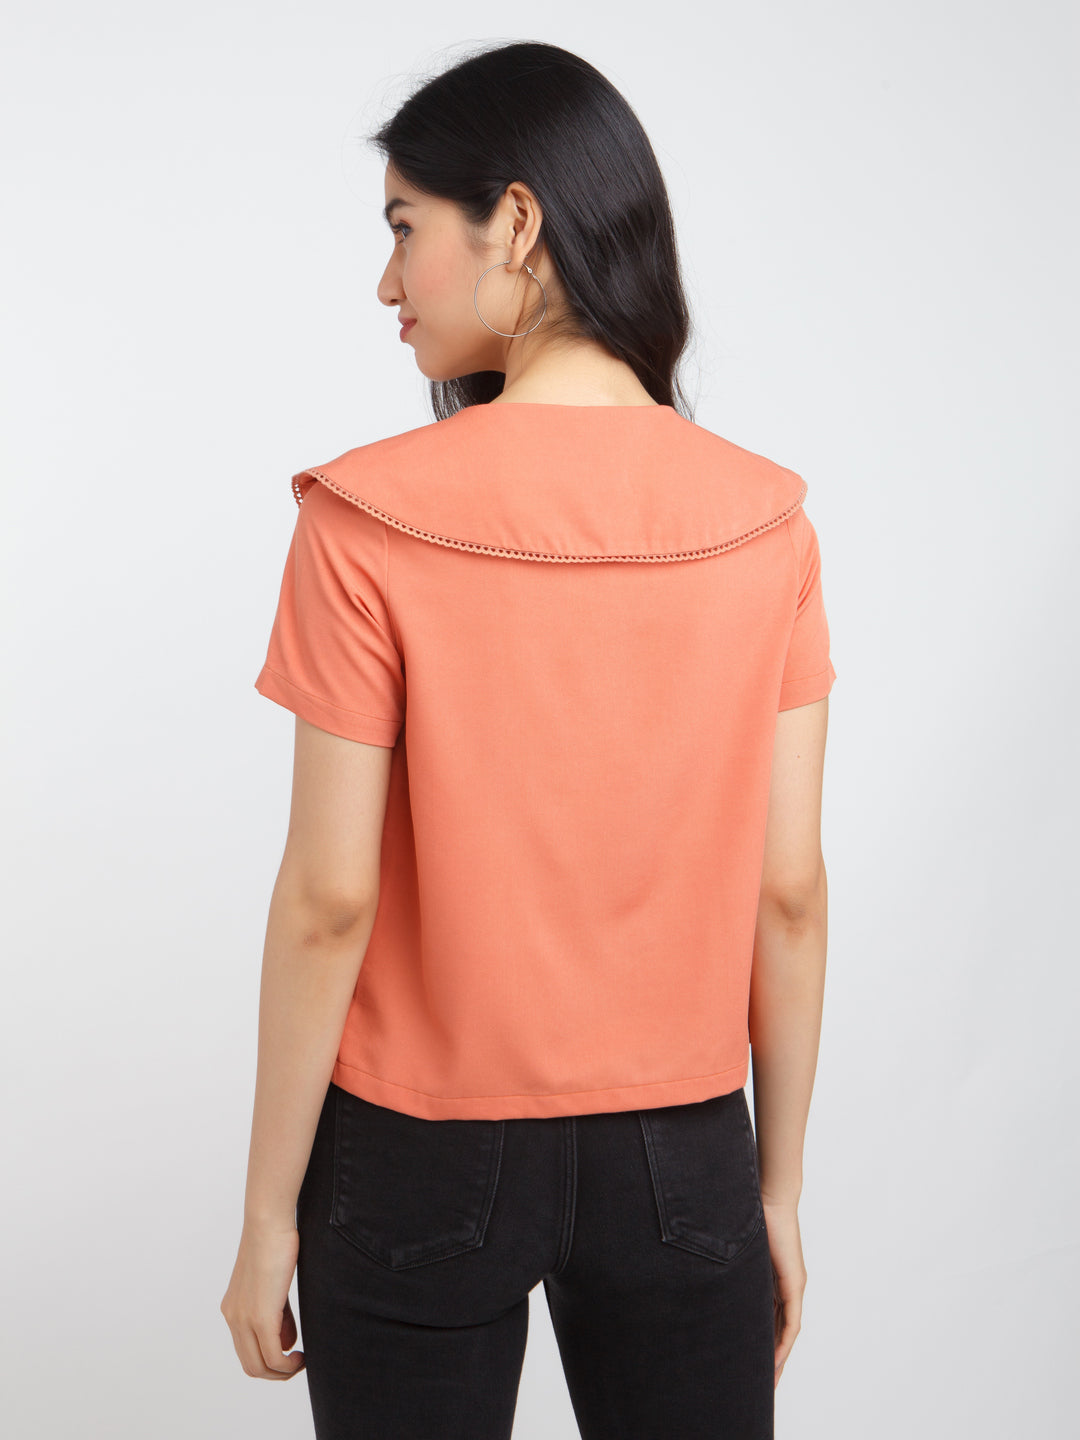 Orange Solid Lace Insert Top For Women